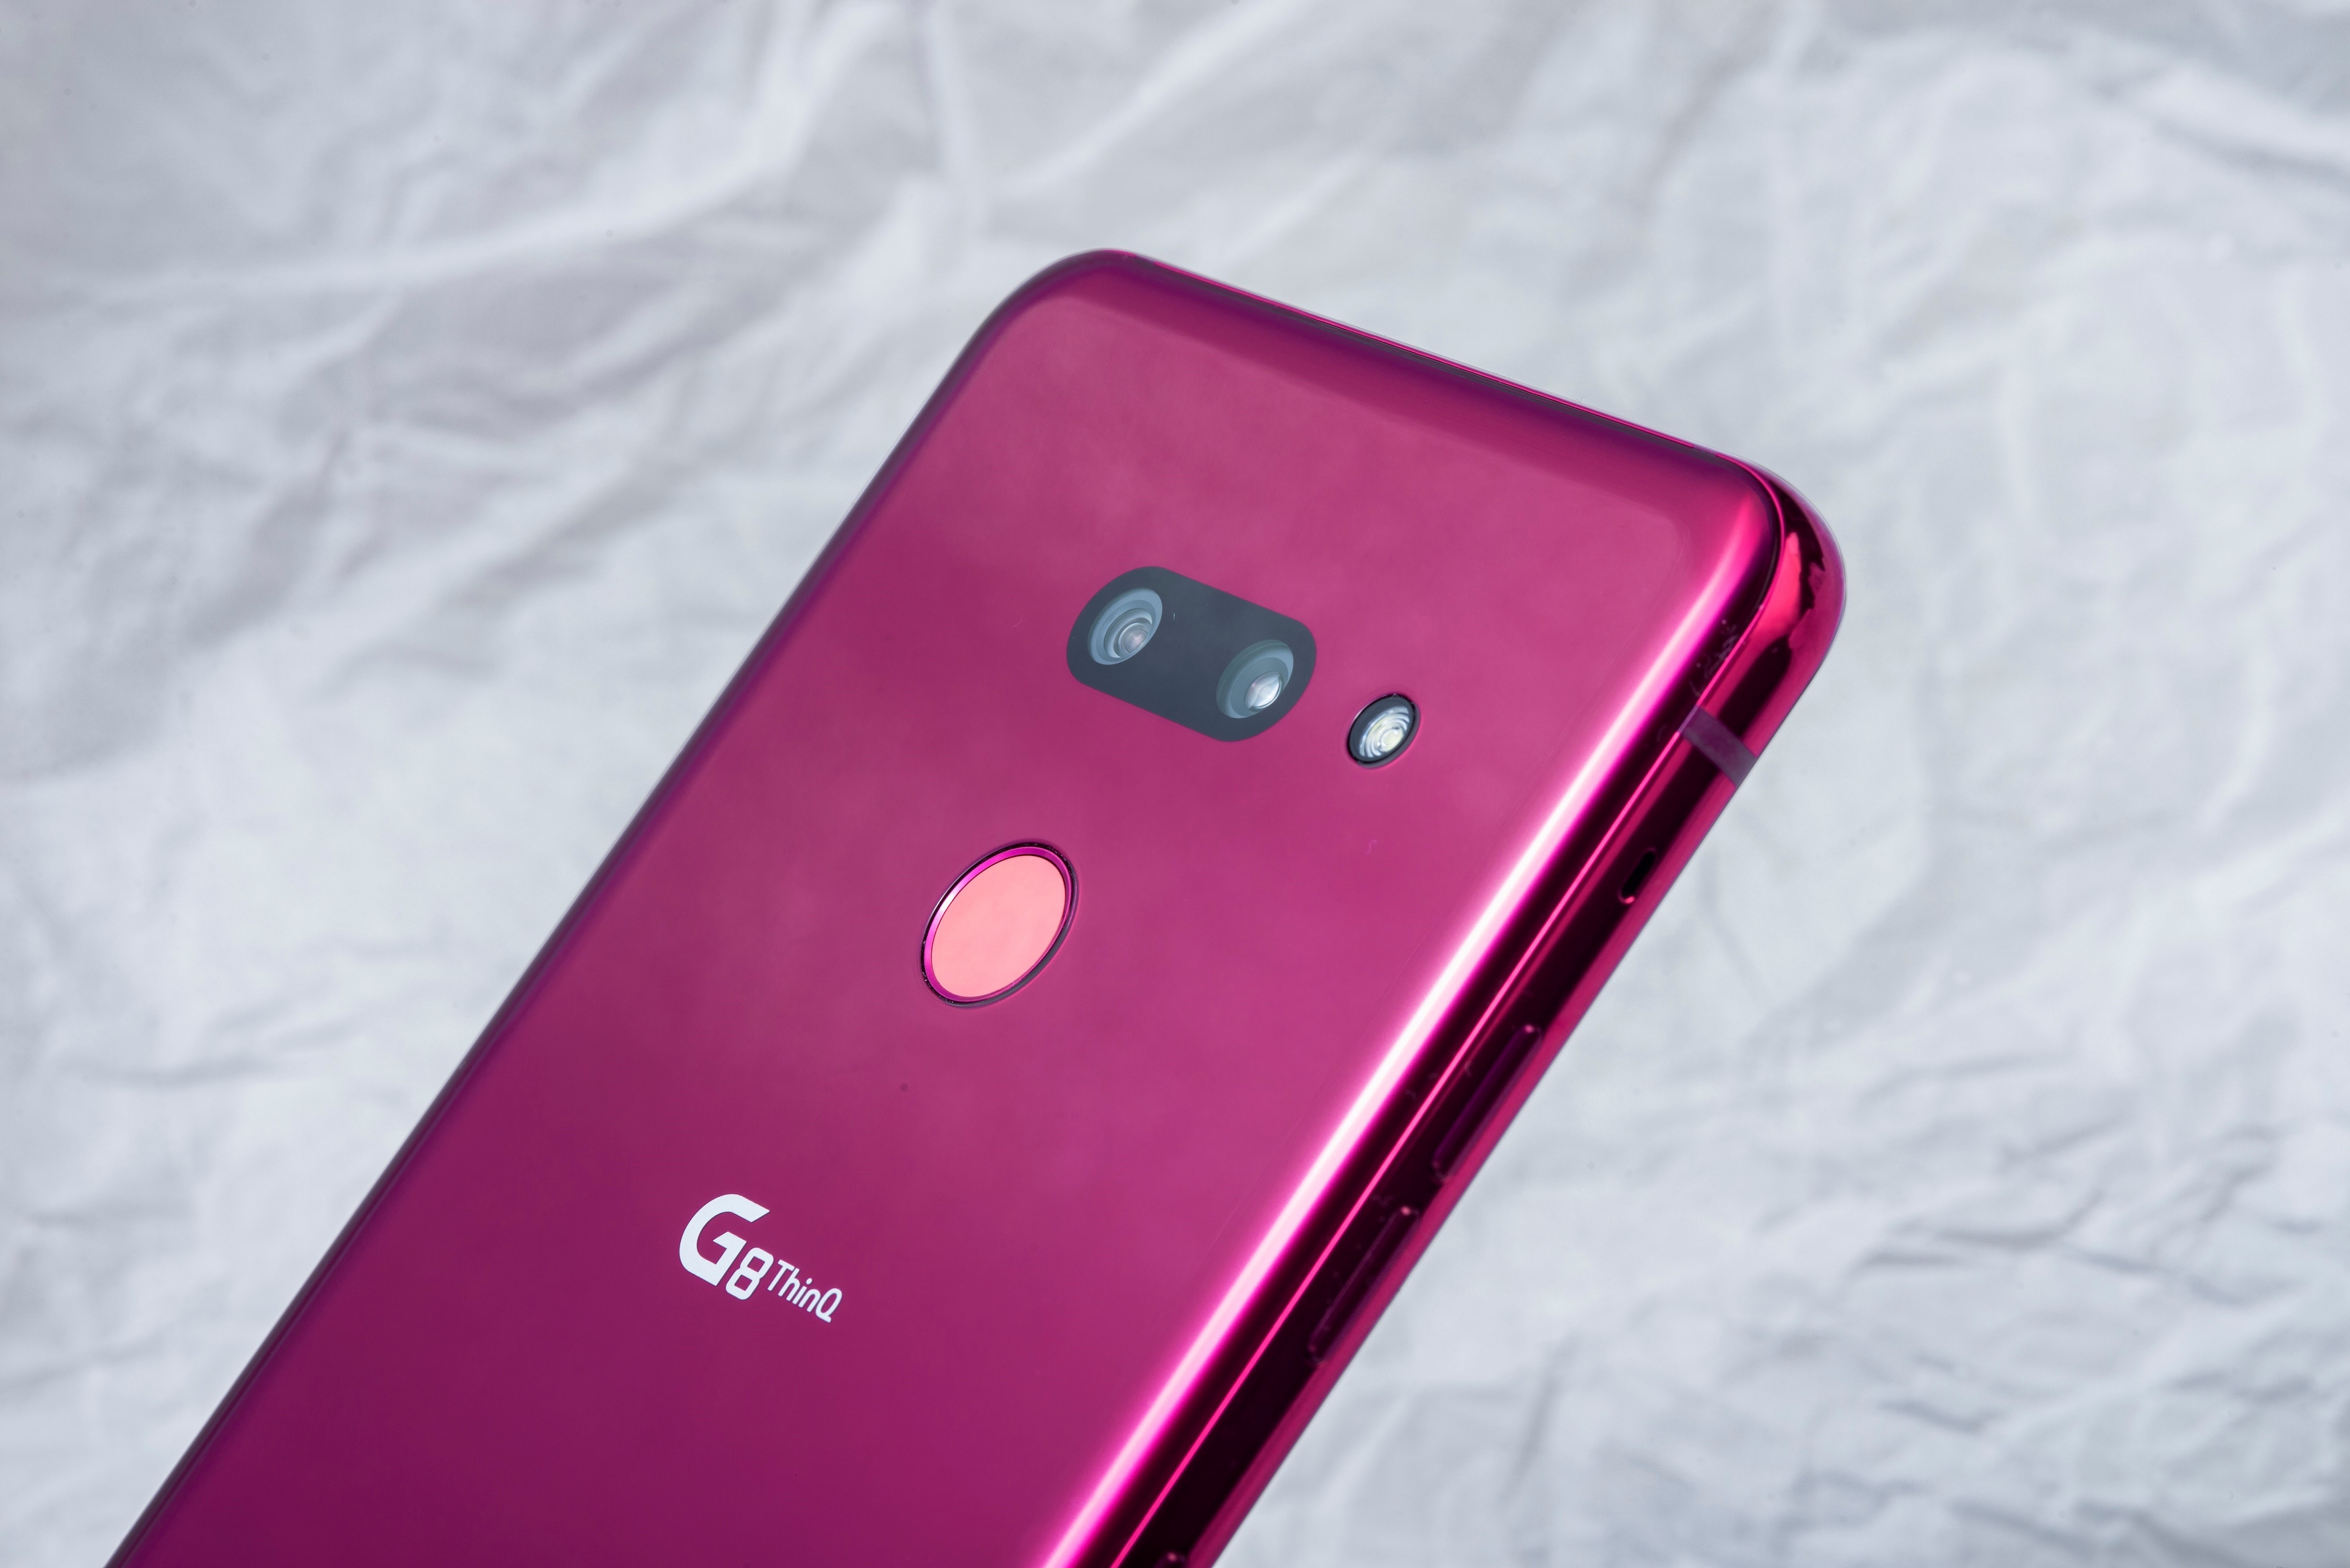 WITH LG G8 THINQ LESS IS ACTUALLY MORE